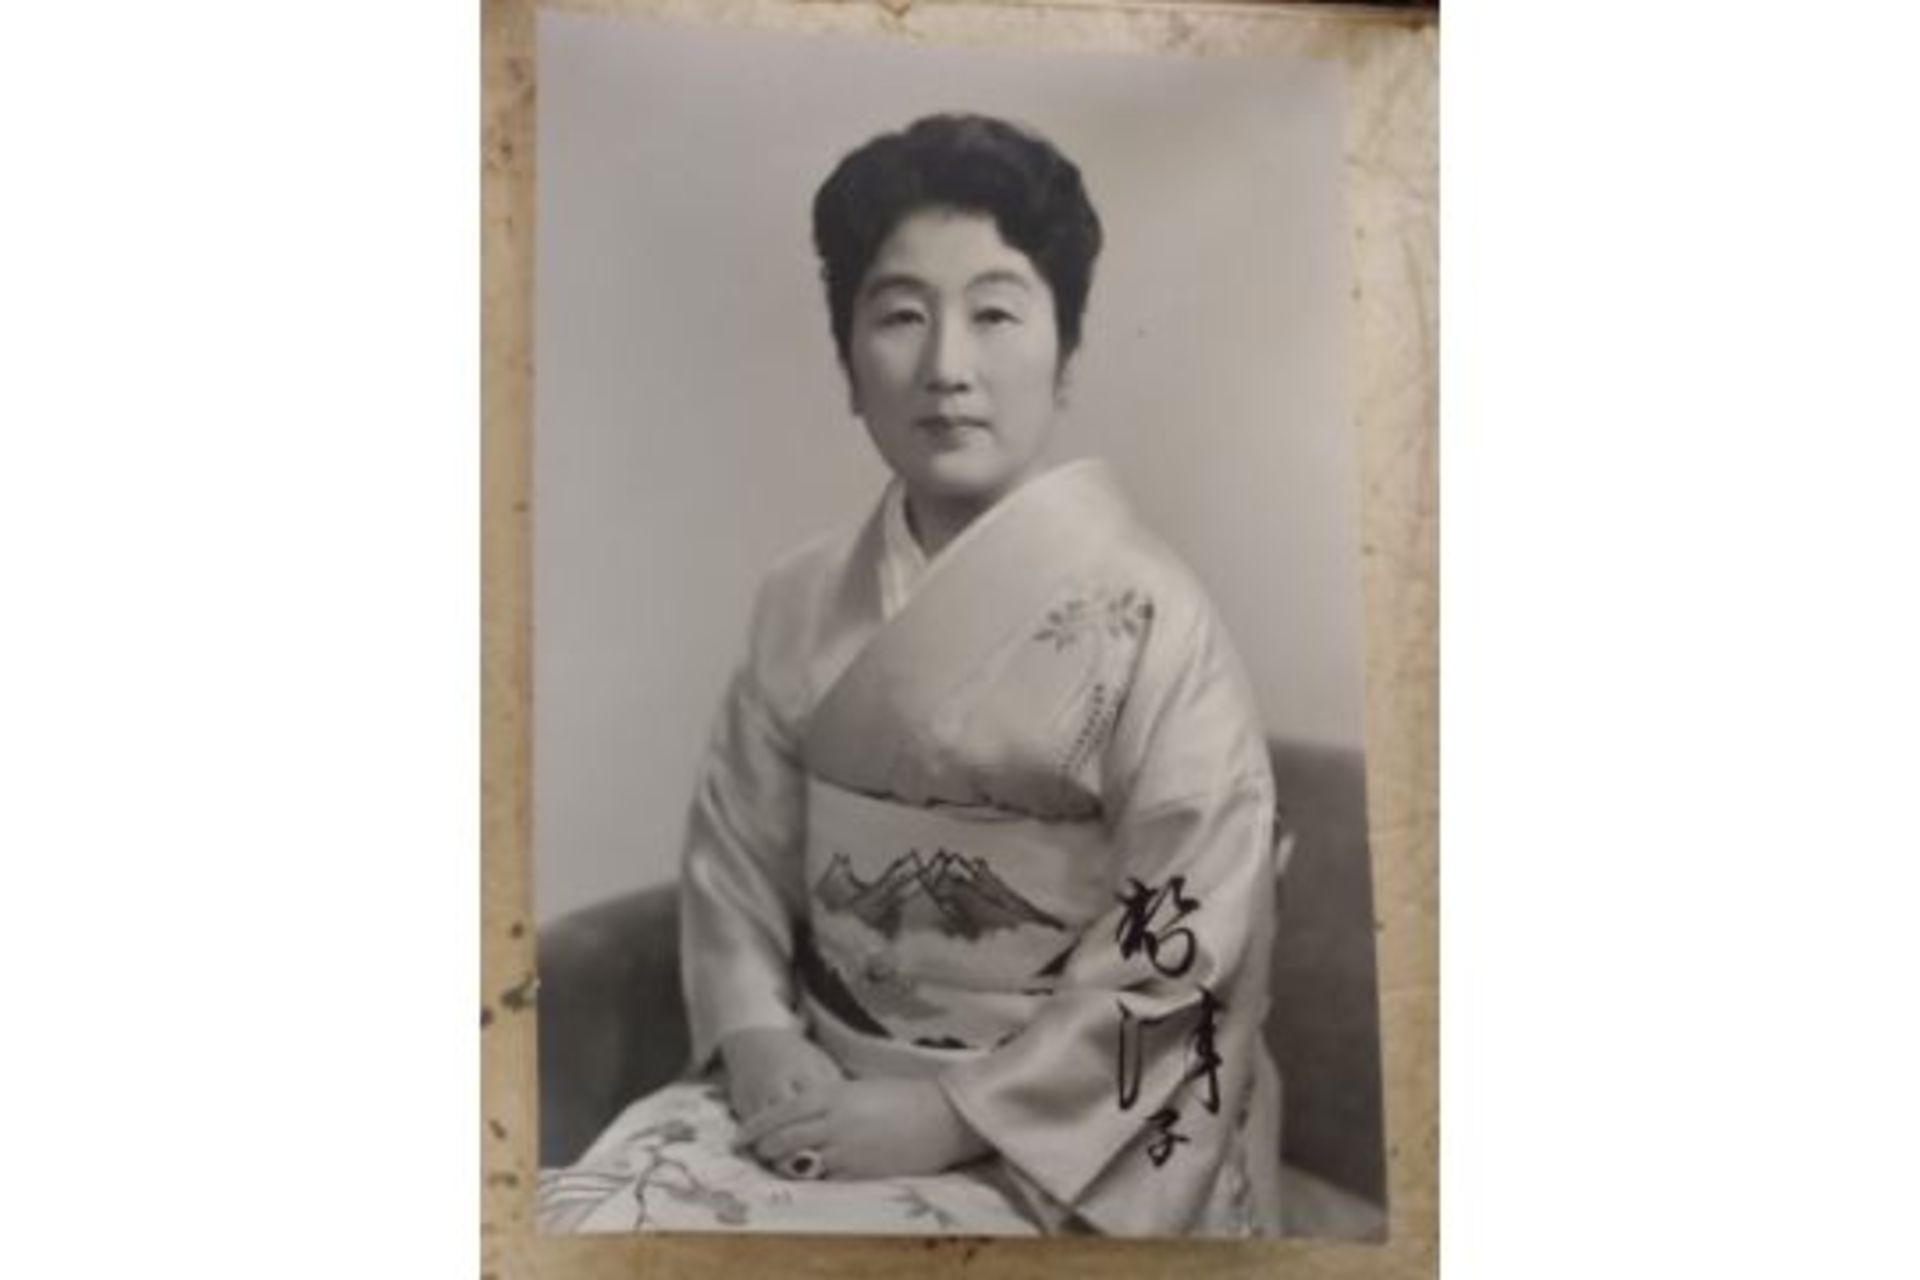 Royalty Setsuko, wife of Prince Chichibu, younger brother of Emperor Showa - Image 3 of 8